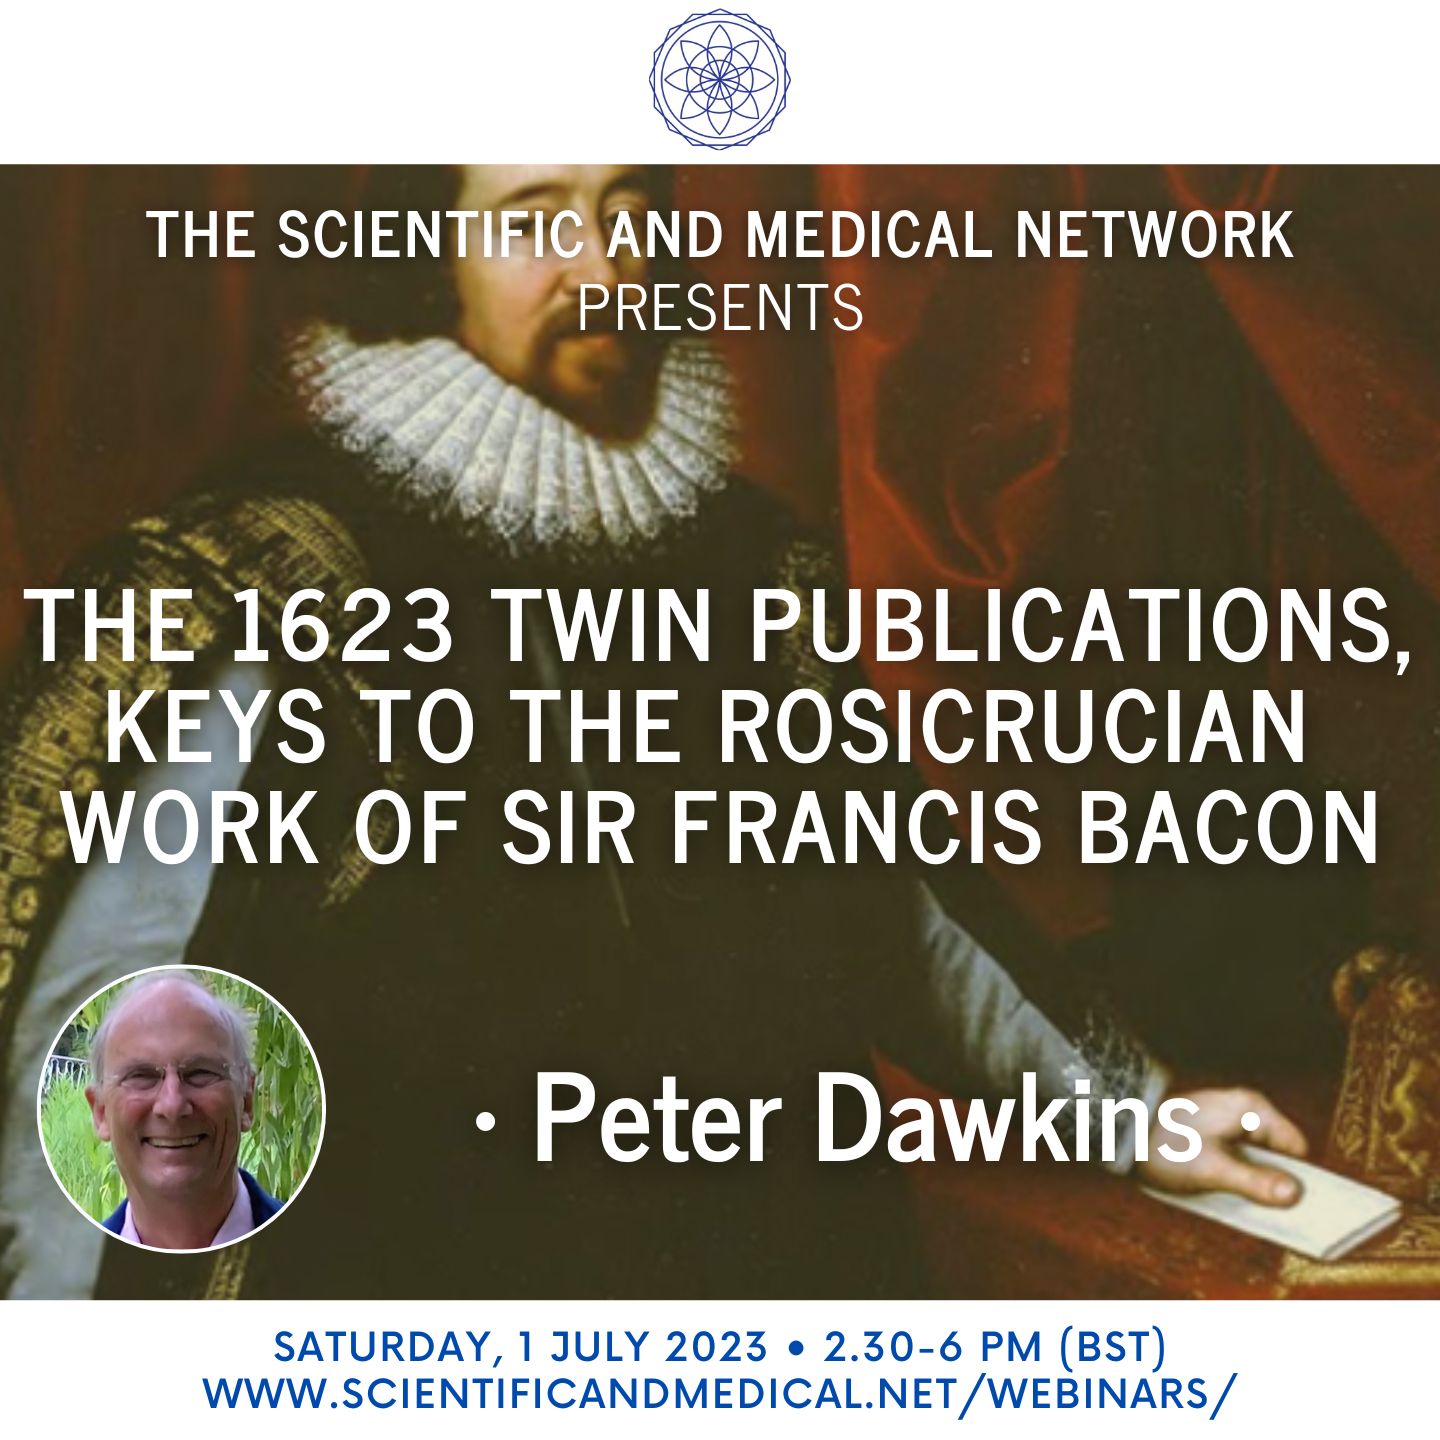 Peter Dawkins – The 1623 Twin Publications Keys to the Rosicrucian Work of Sir Francis Bacon 2